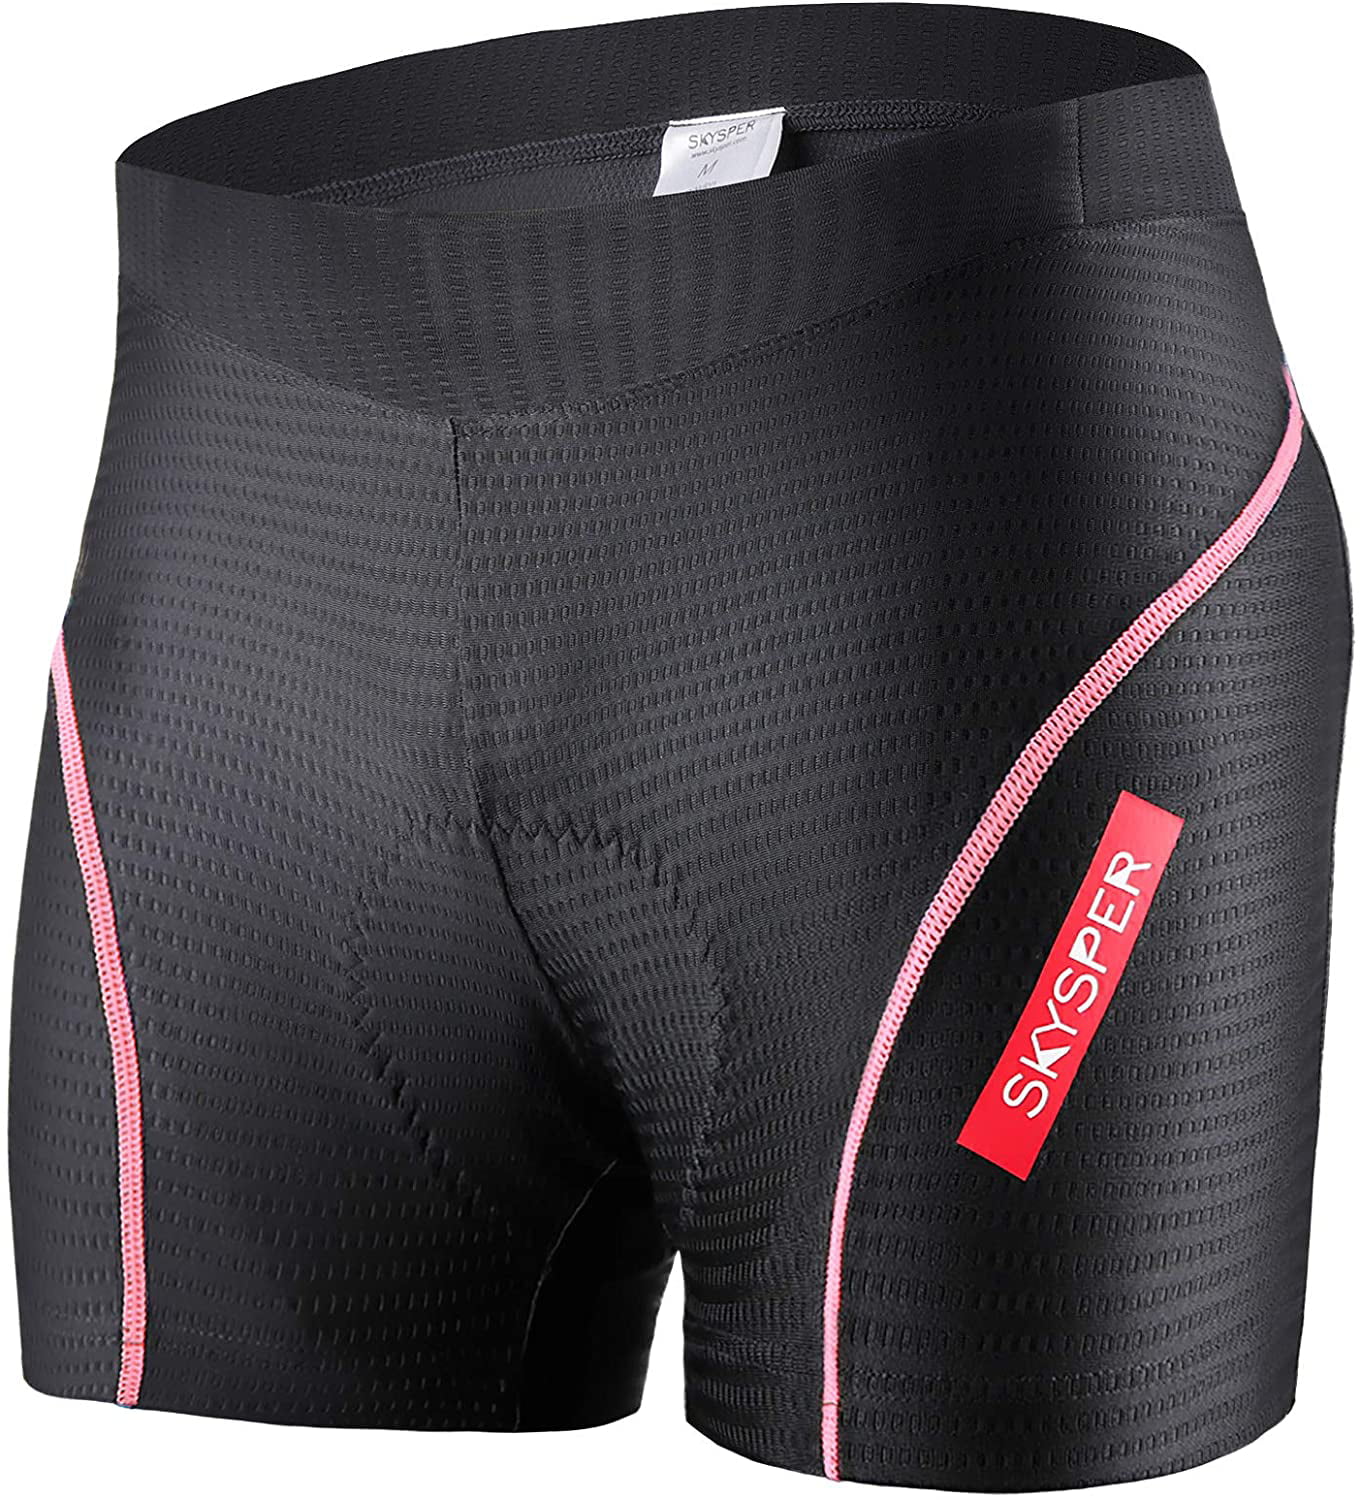 SKYSPER Cycling Underpants for Women Pants Bicycle Quick Dry Breathable Padded Gel 